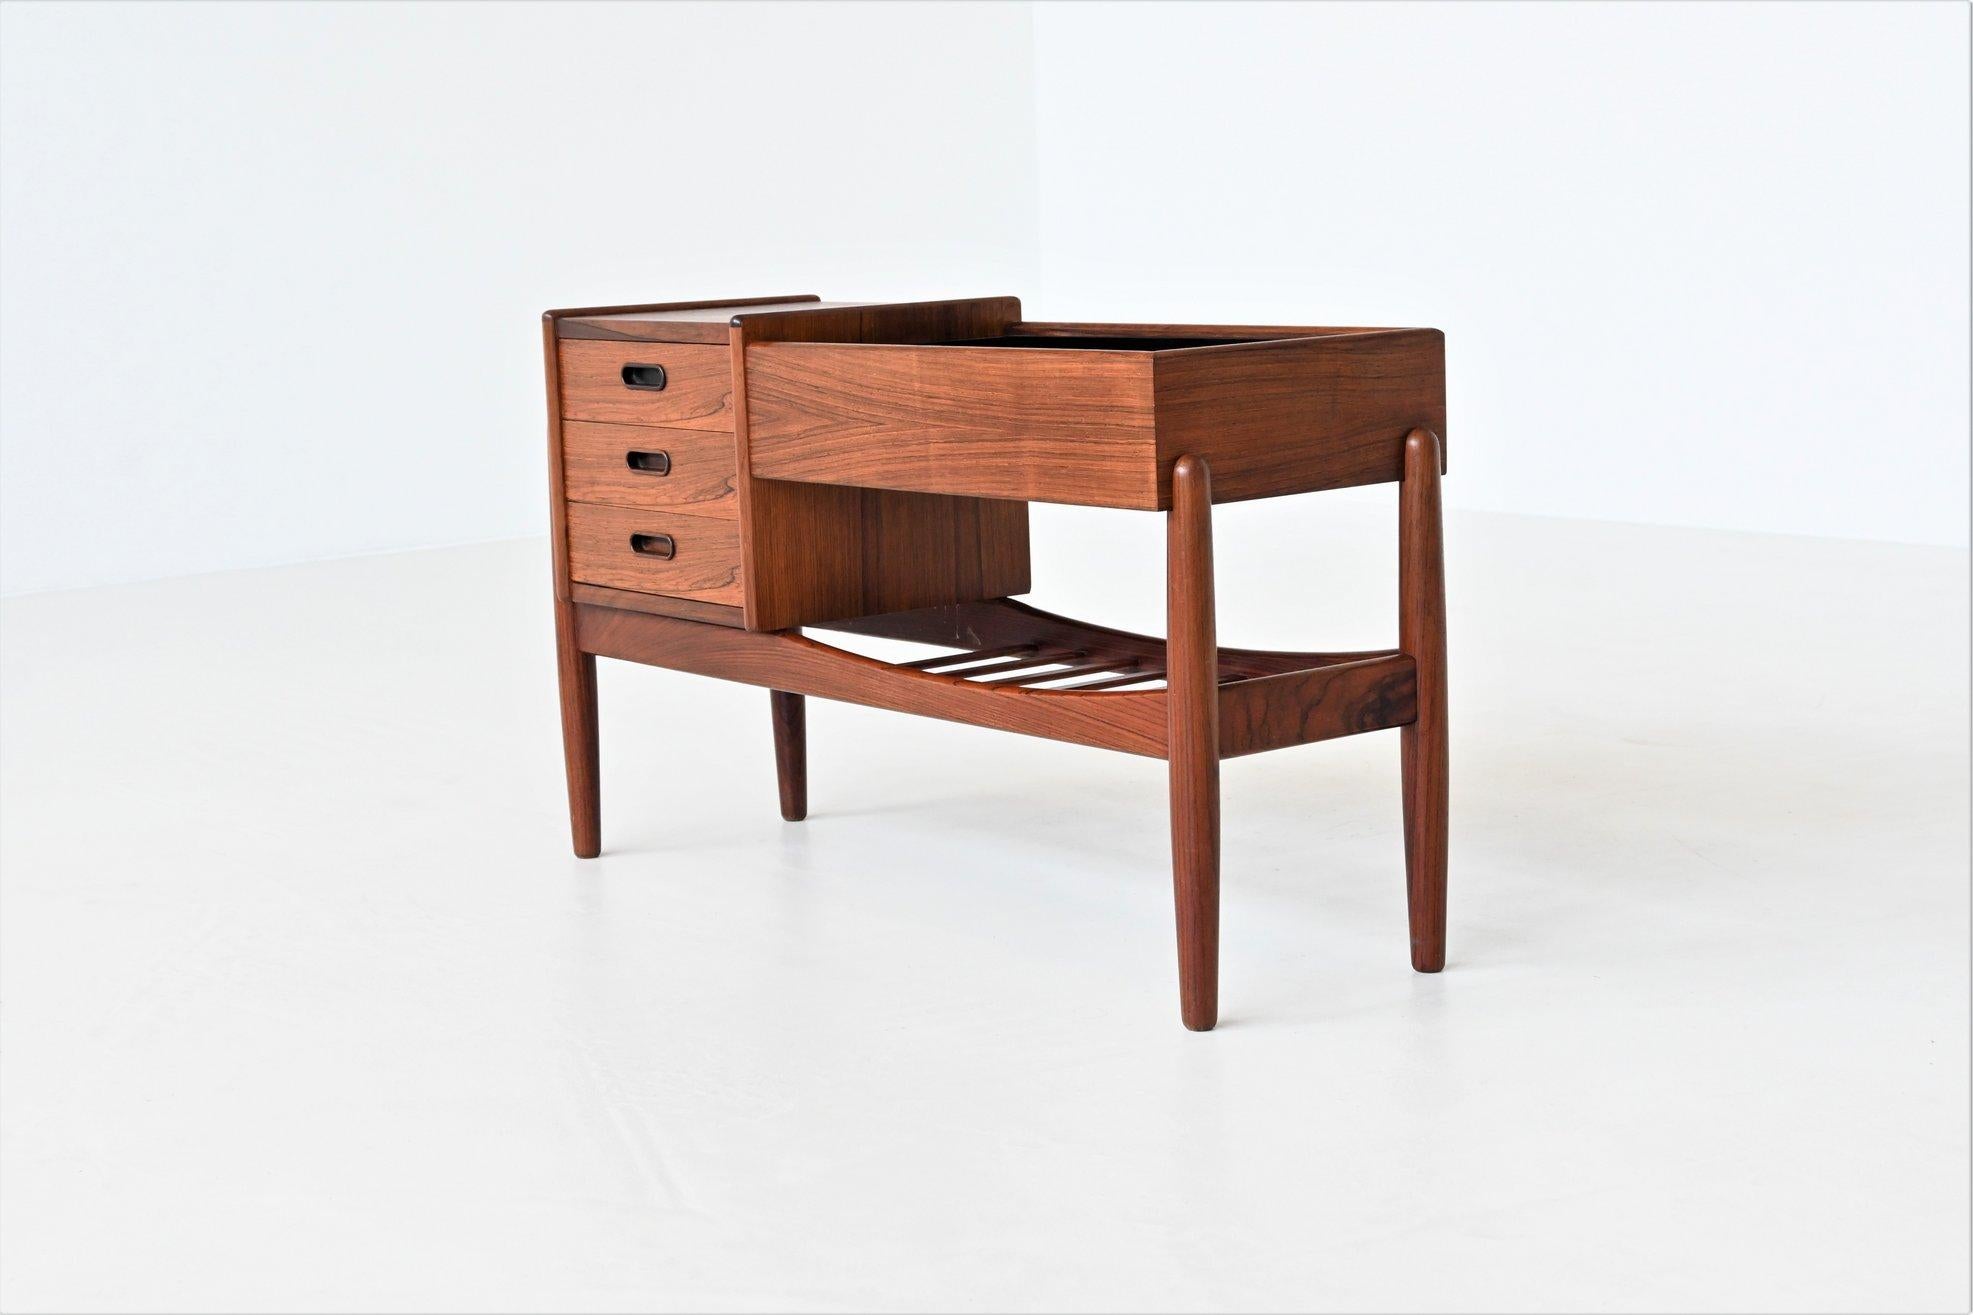 Beautiful shaped small planter table or chest of drawers designed by Arne Wahl Iversen for Vinde Møbelfabrik, Denmark 1961. It is made of veneered and solid rosewood and has a very nice warm grain to it. It looks very decorative with a nice plant in